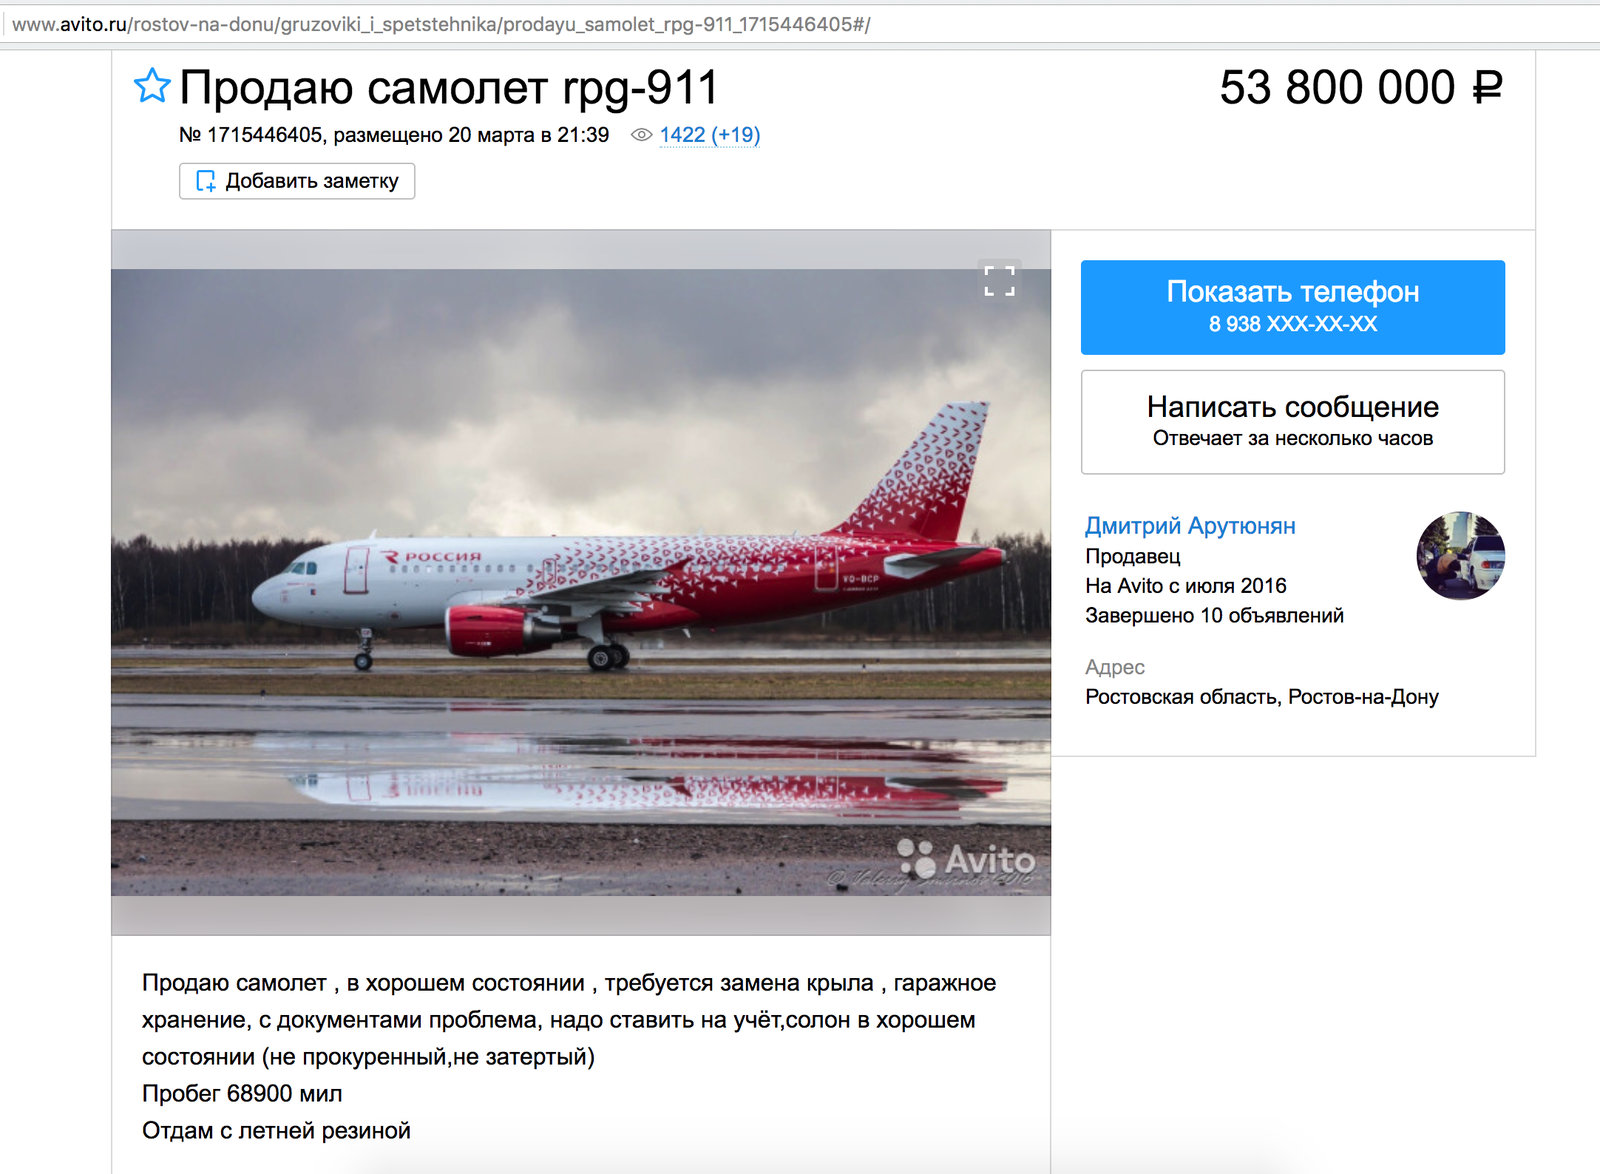 Gives away with summer tires - Avito, Announcement on avito, Screenshot, Rostov-on-Don, Harutyunyan, Airplane